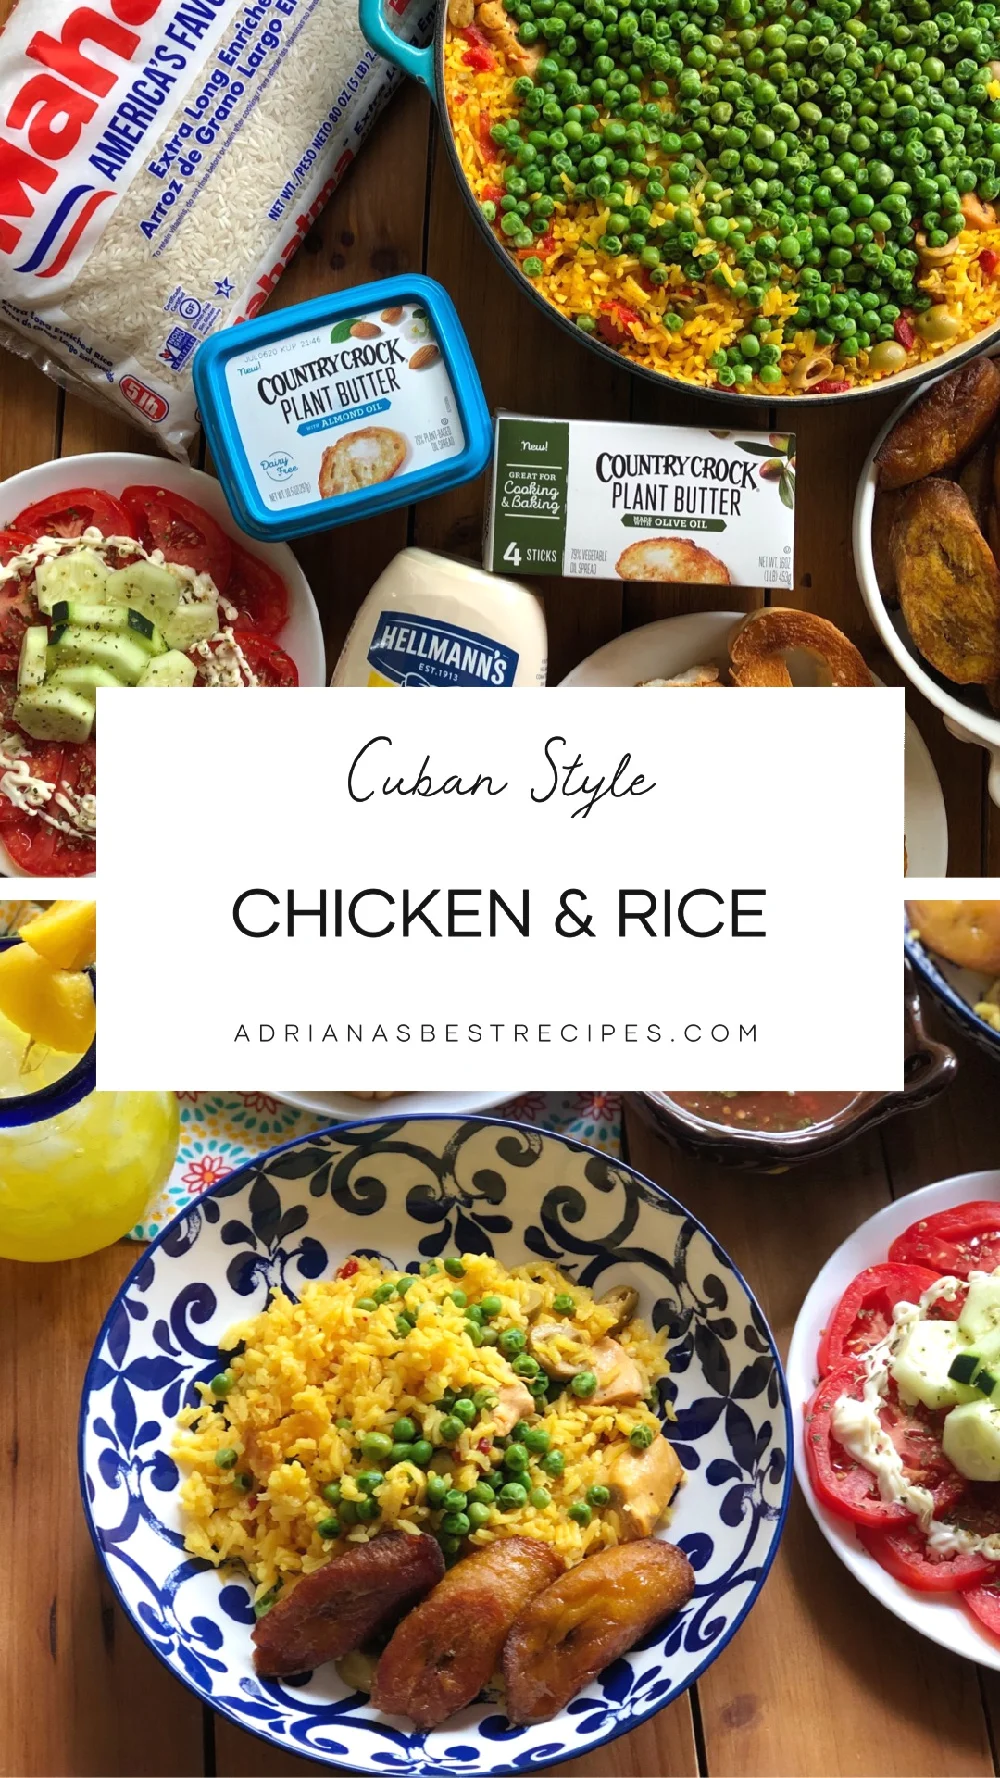 This recipe is a one-pot meal for chicken and rice called in Spanish "Arroz con Pollo." The ingredients include long-grain rice, white chicken meat, olive oil, butter, peas, saffron, olives, chicken stock, and Latino condiments. All ingredients found at Sedano's Supermarkets. 